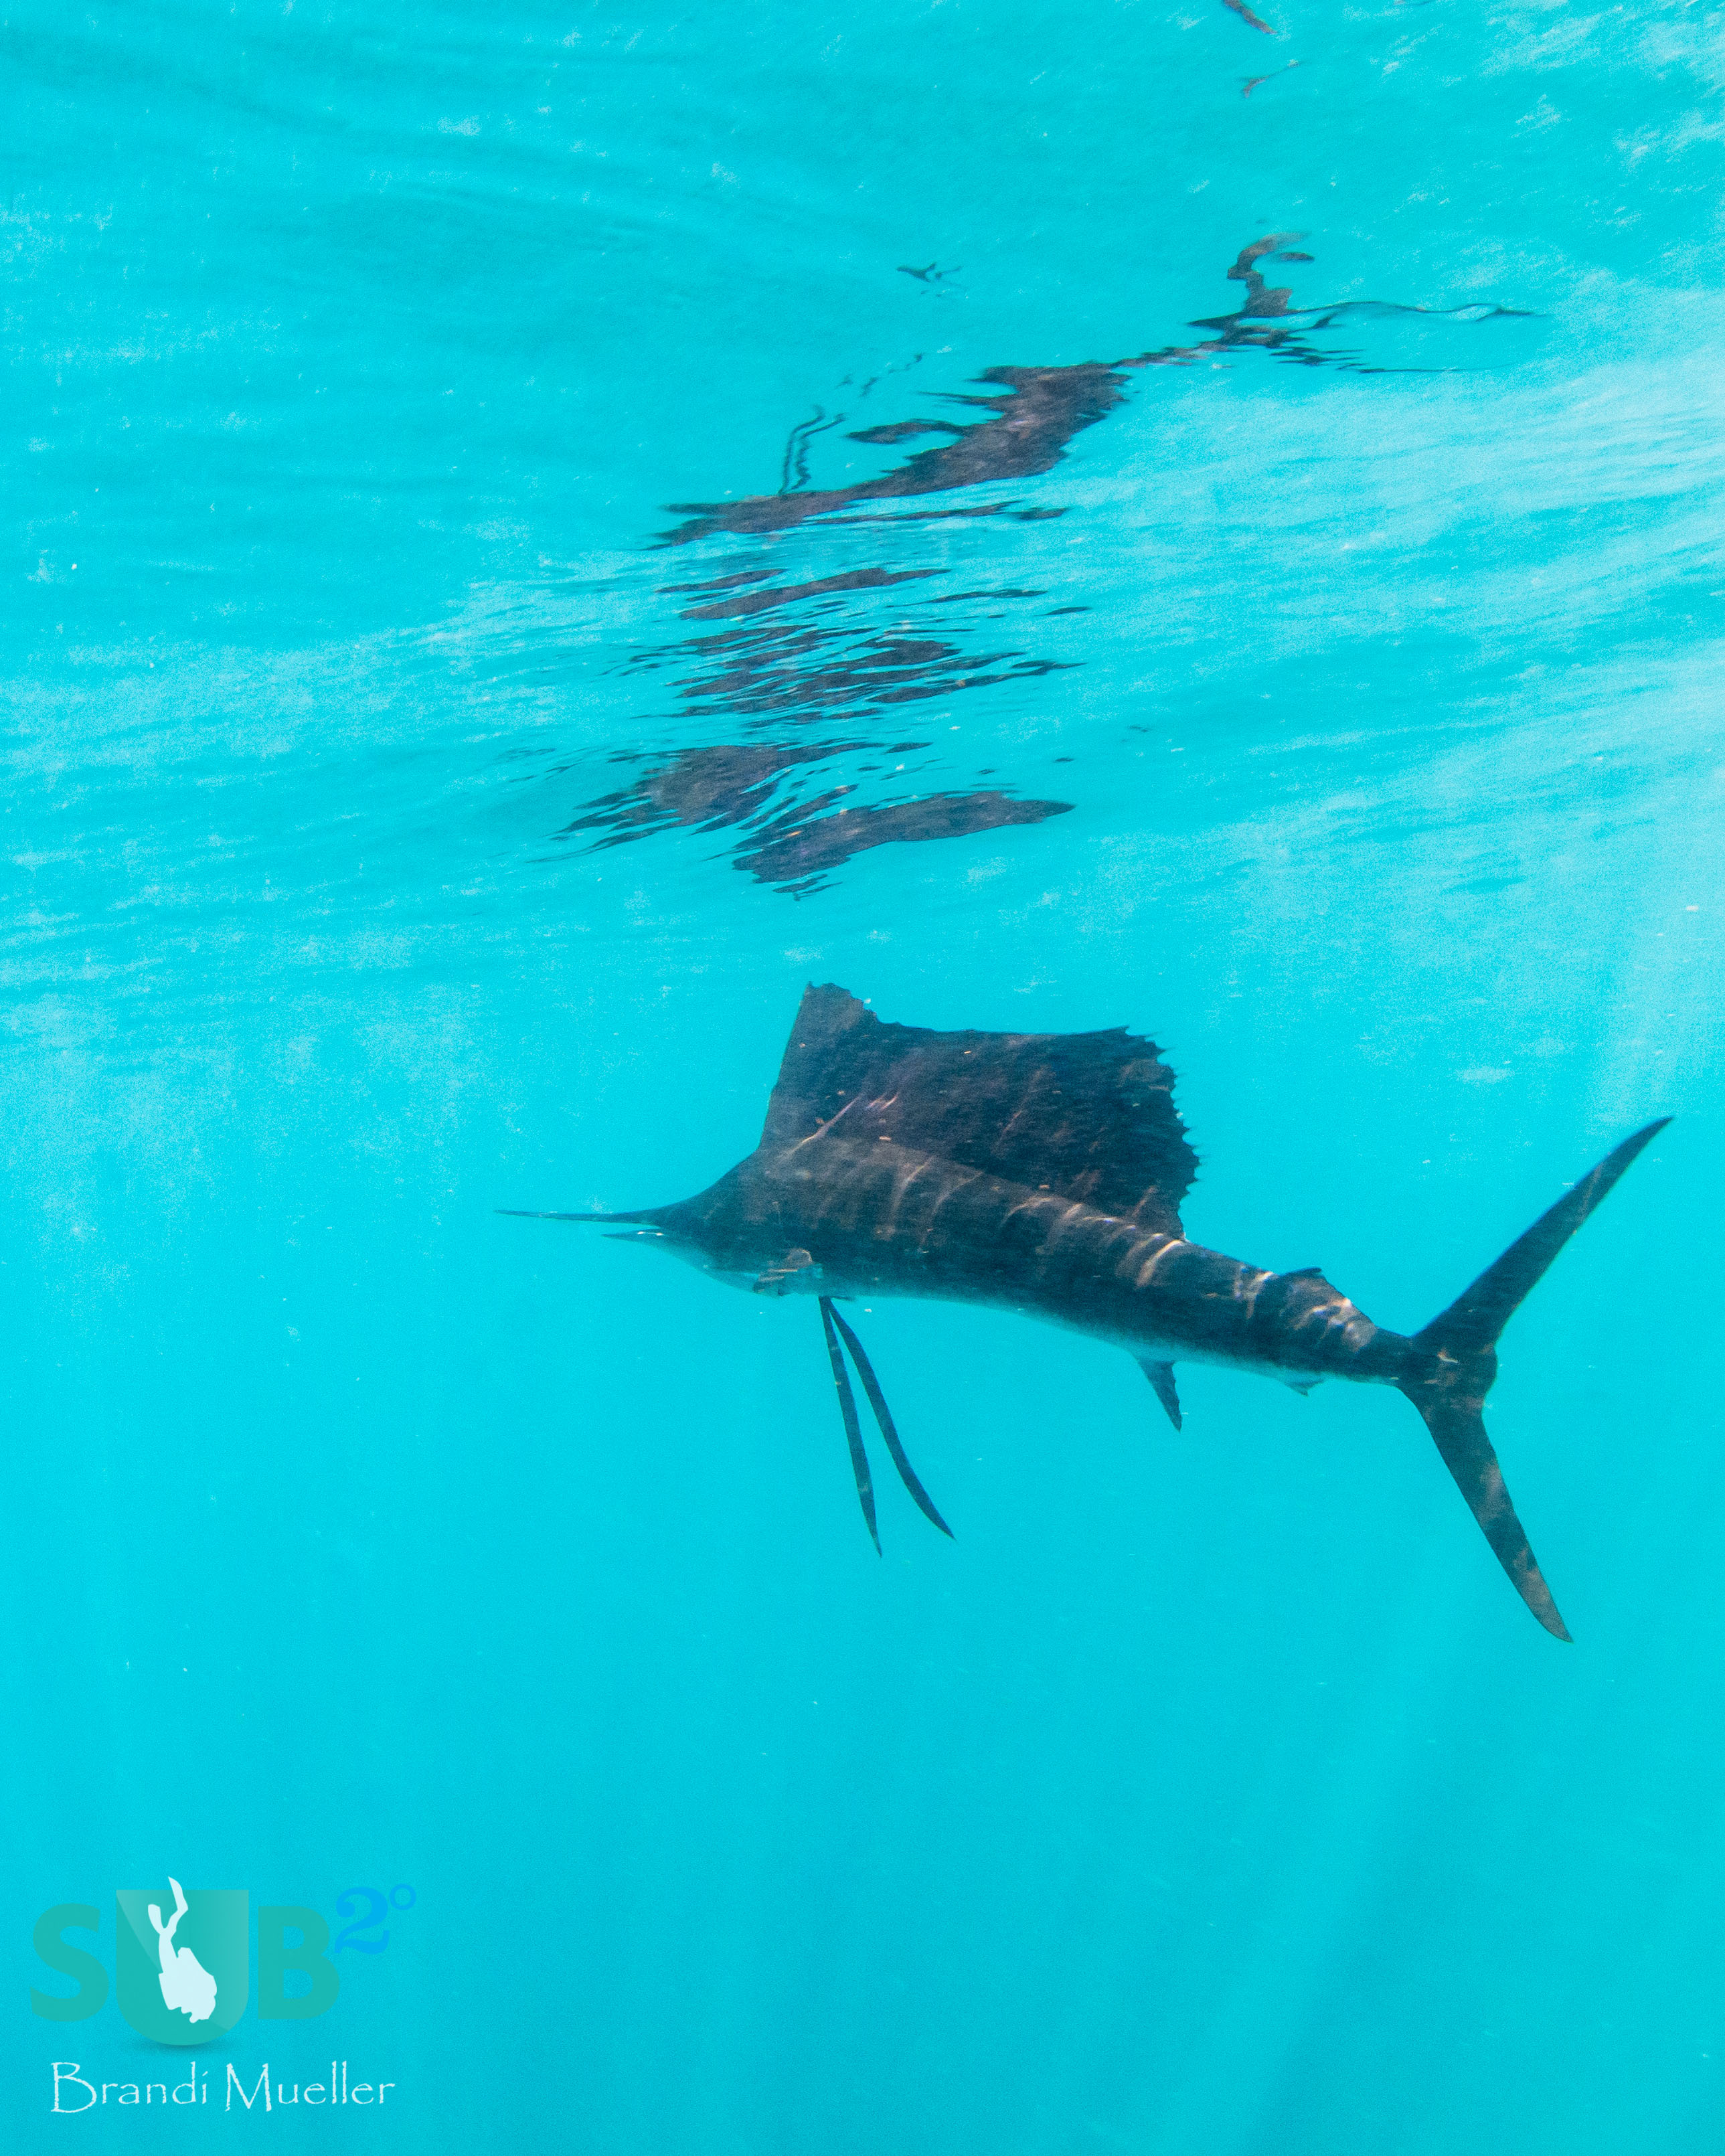 A sailfish with its sail fully extended near the surface.